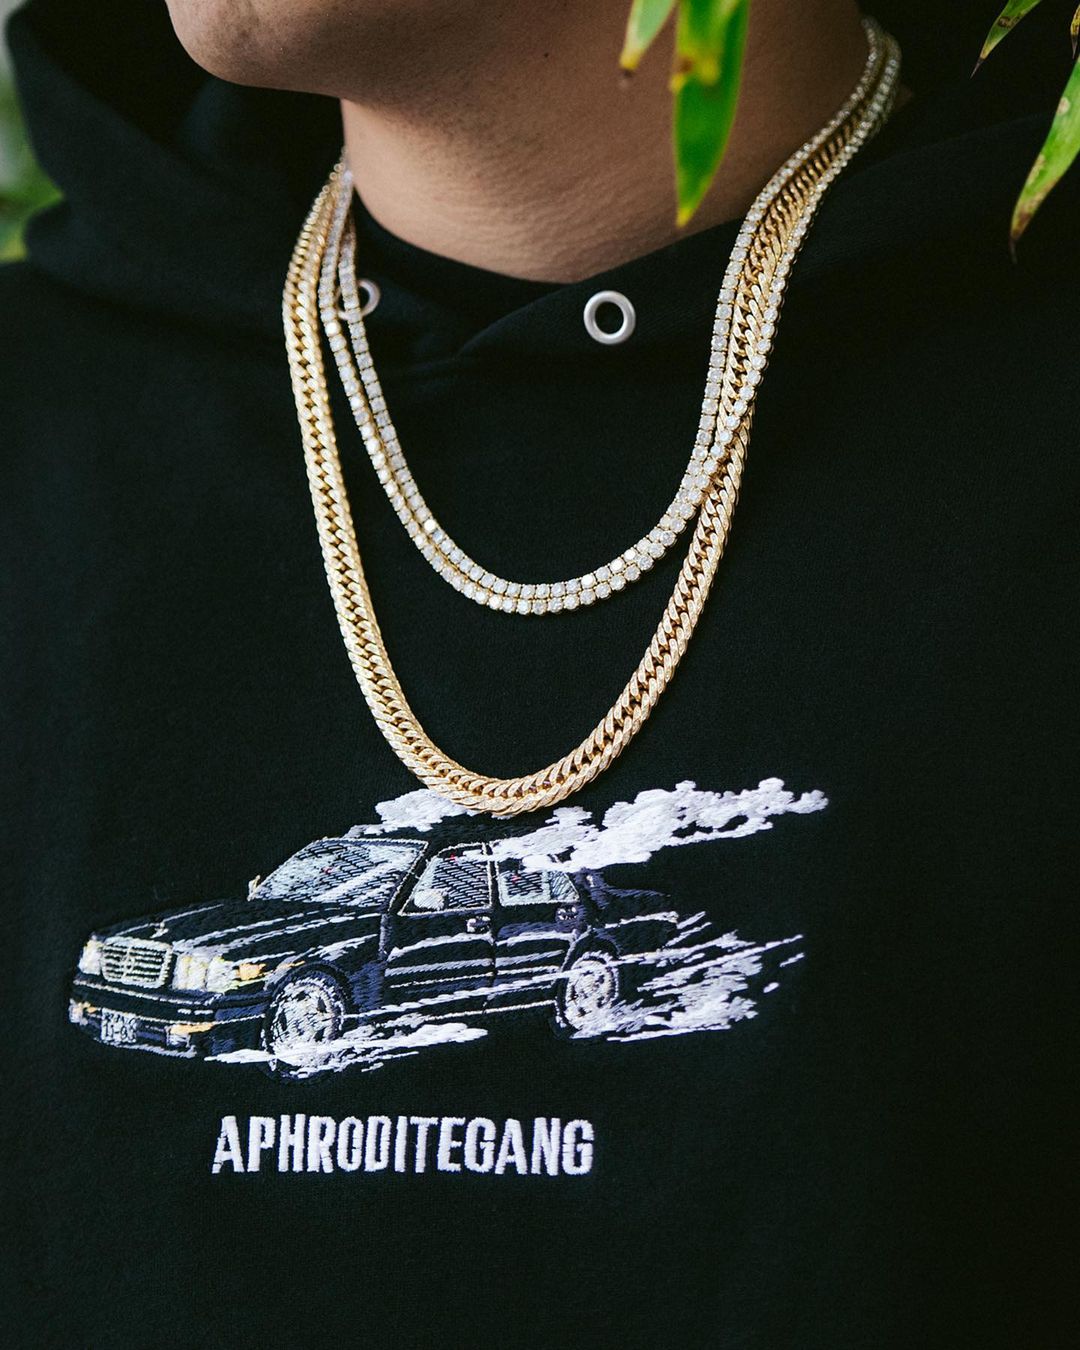 aphroditegang-budspool-aoi-industry-collaboration-release-20231118-pop-up-store